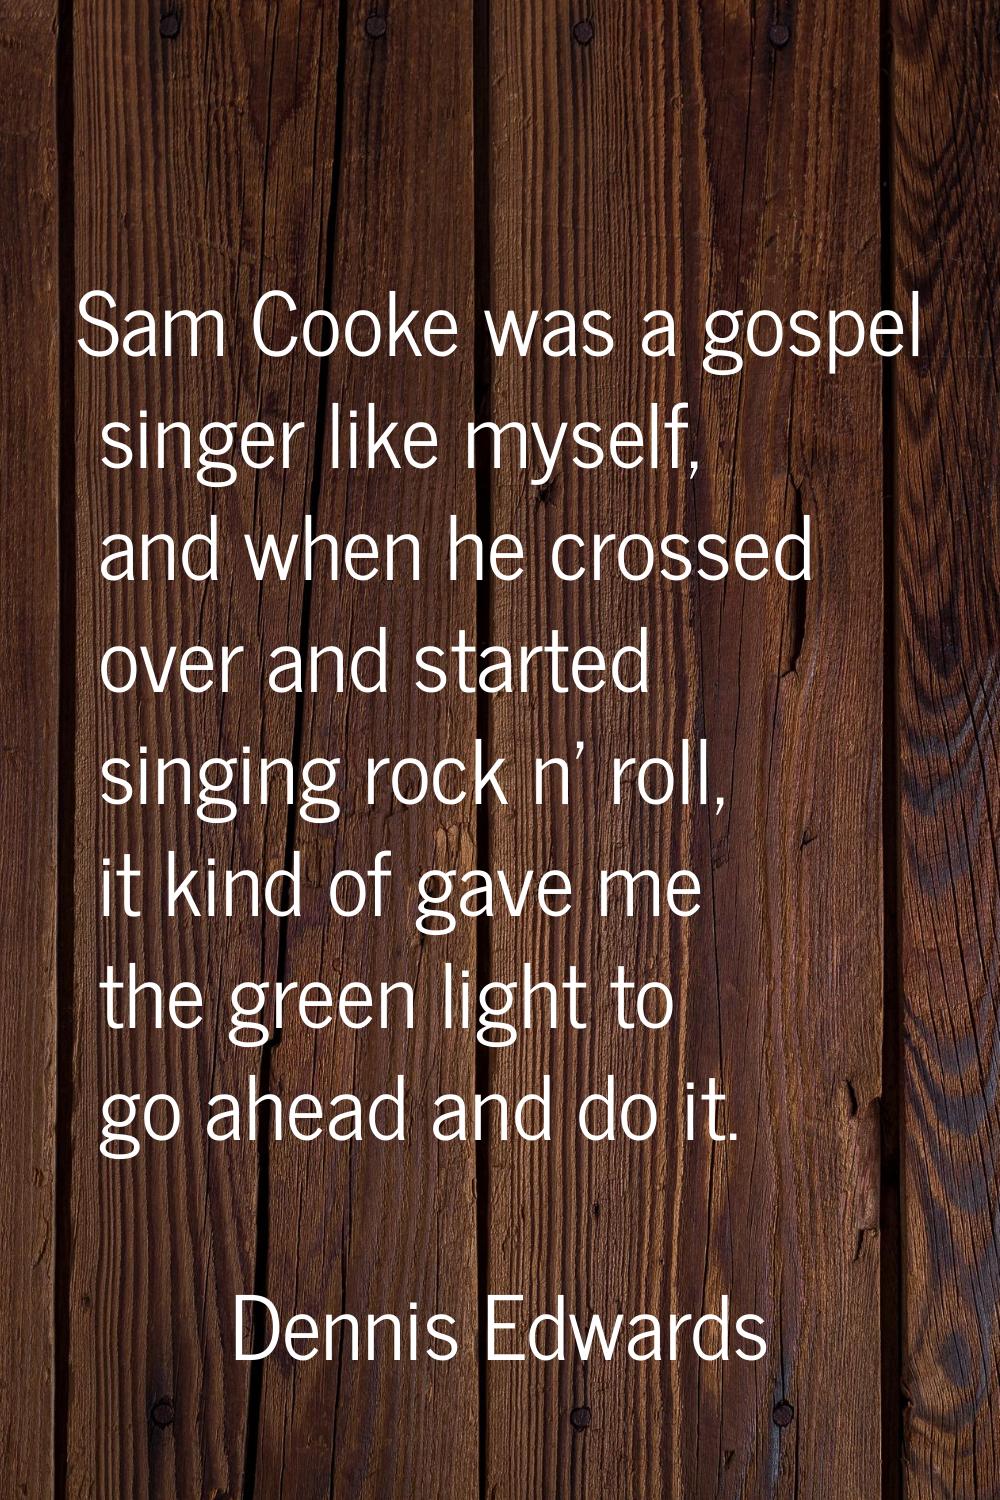 Sam Cooke was a gospel singer like myself, and when he crossed over and started singing rock n' rol